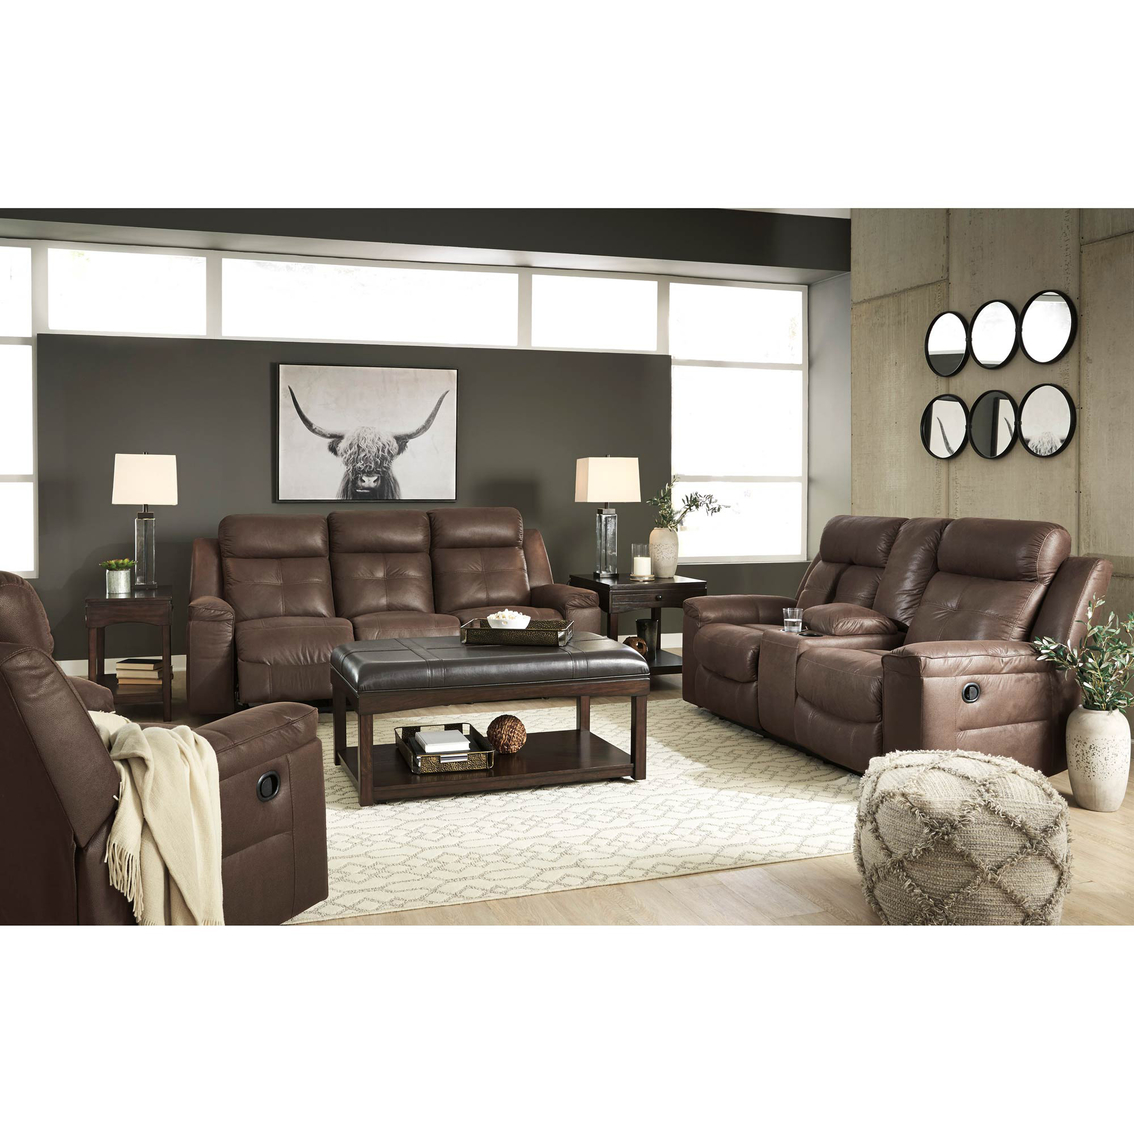 Signature Design by Ashley Jesolo Double Reclining Loveseat with Console - Image 3 of 4